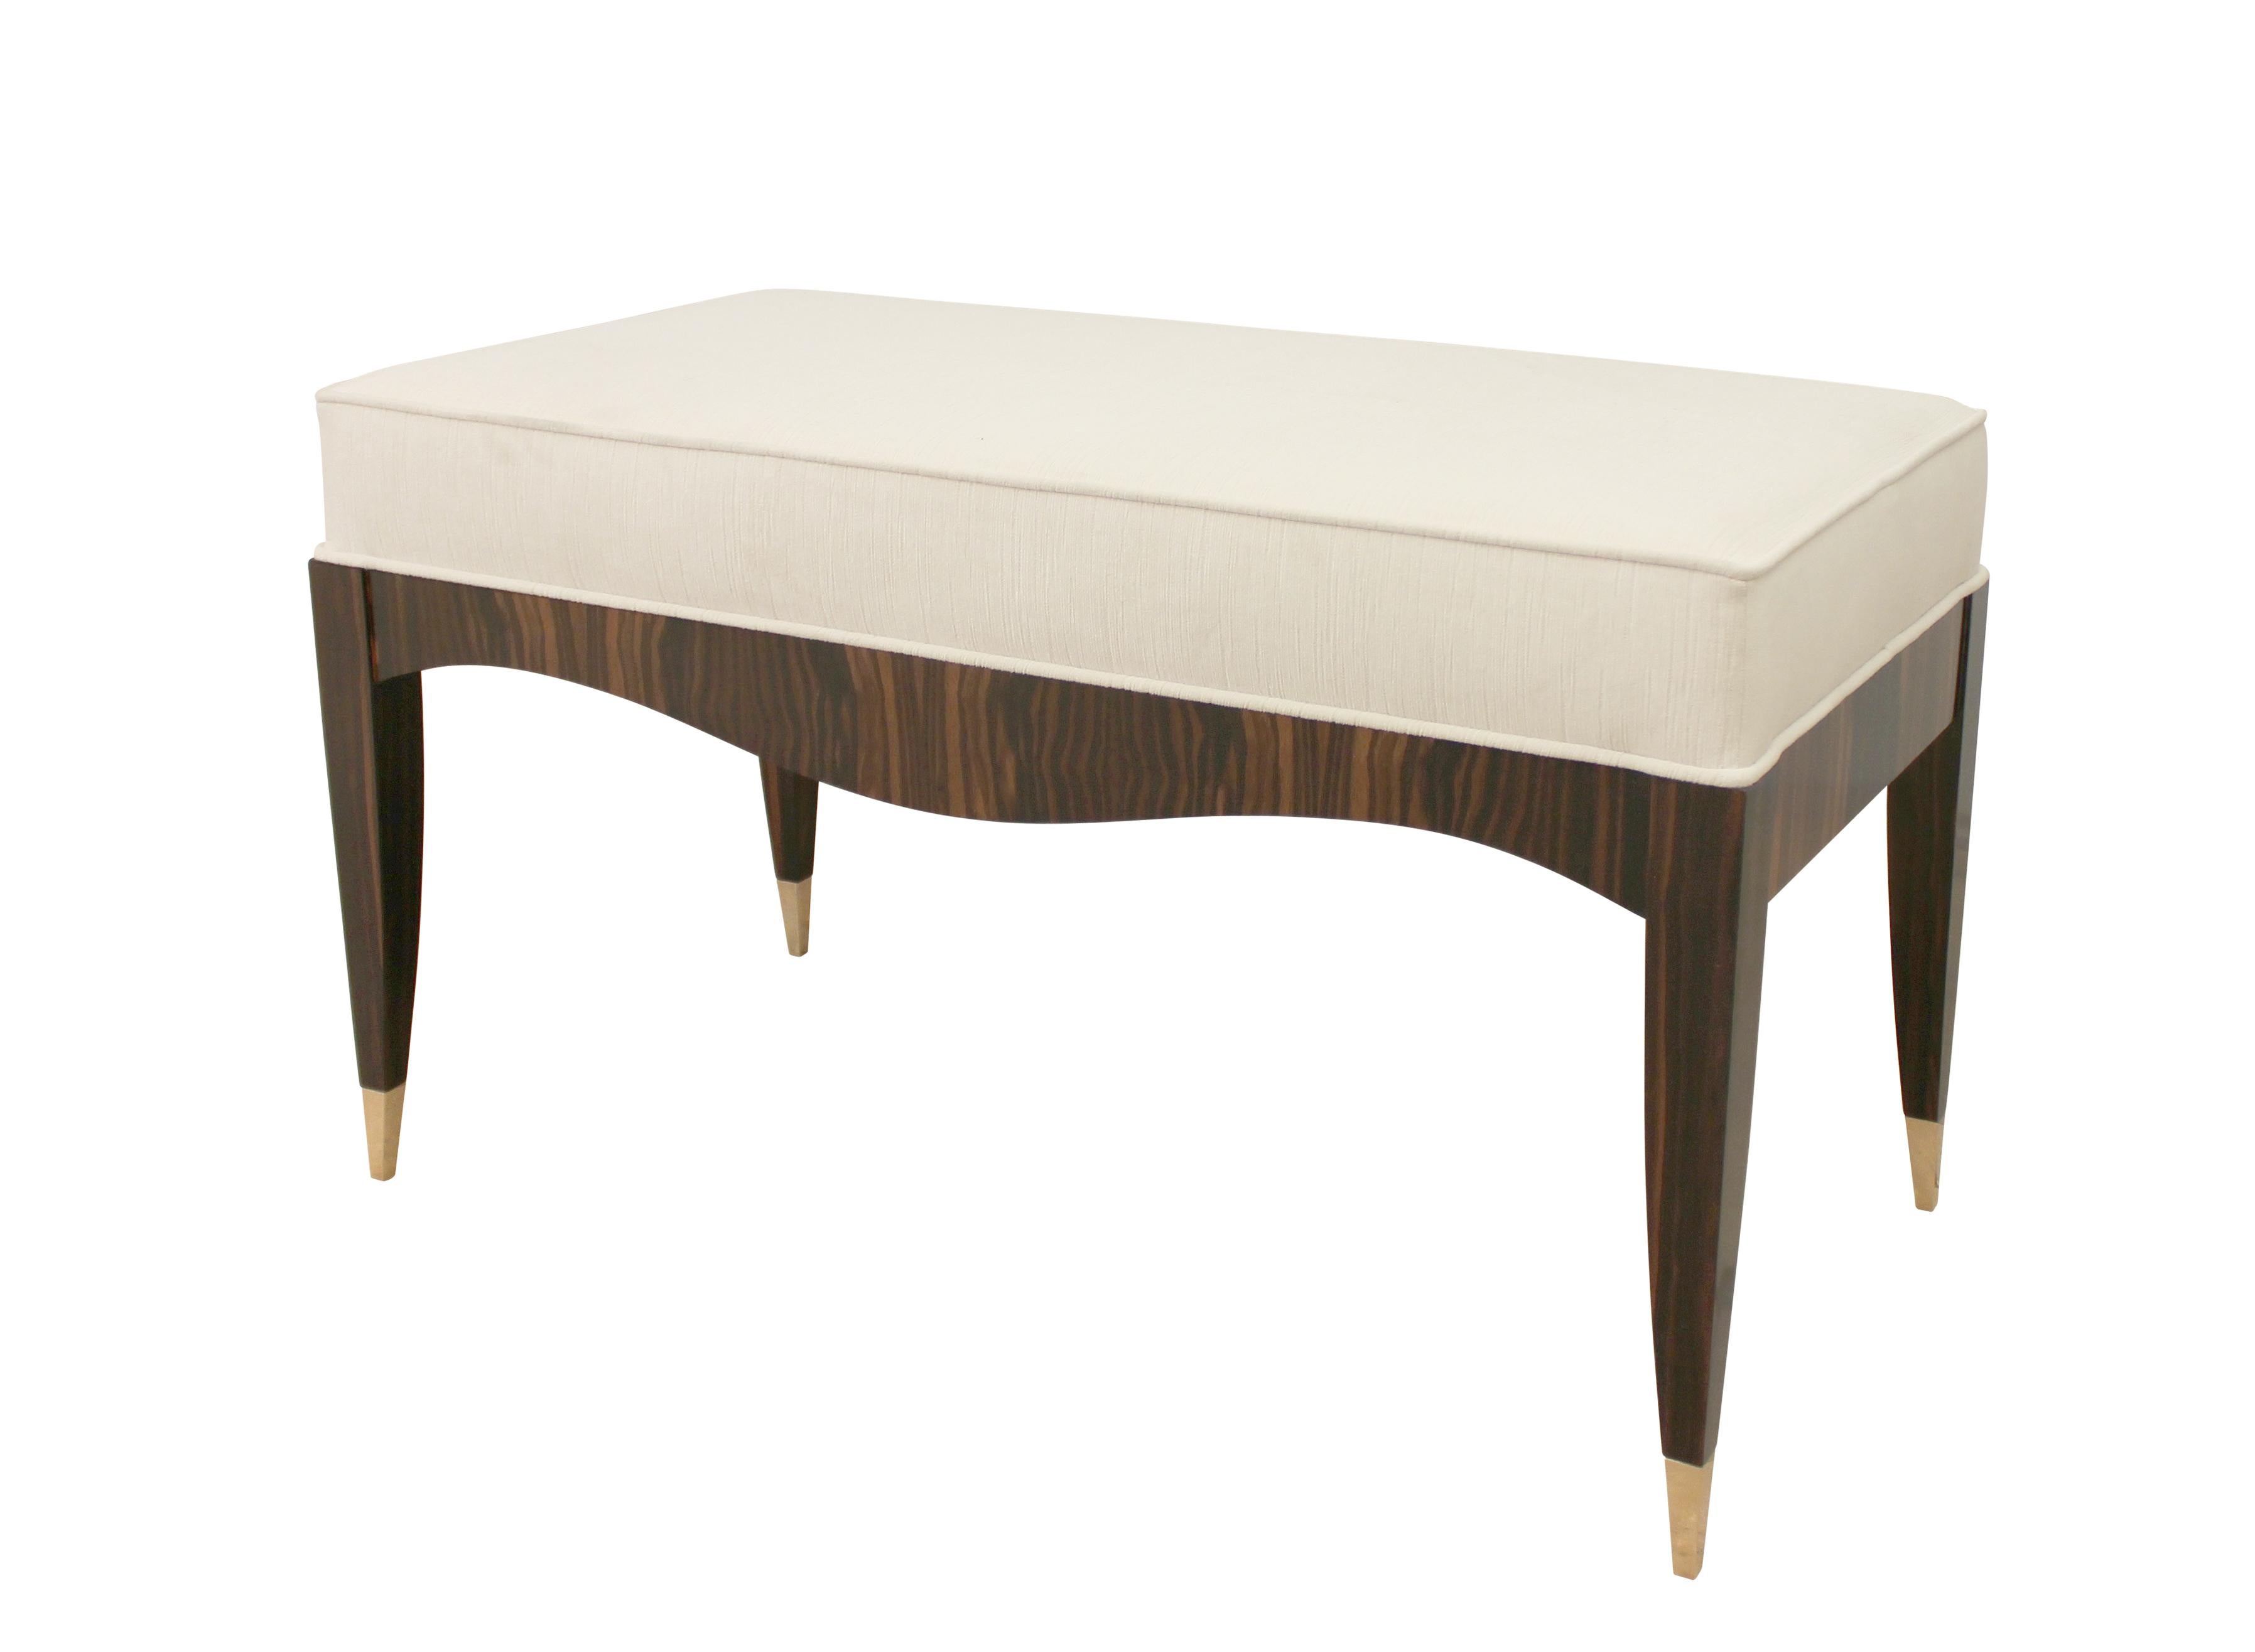 Art Deco Inspired Bench in Ebony Macassar Veneer with Cast Bronze Toe Caps is made with hardwood frame and veneered in book matched ebony Macassar veneer with satin lacquer finish. Polished and lacquered bronze toe caps draw the eye along the curves